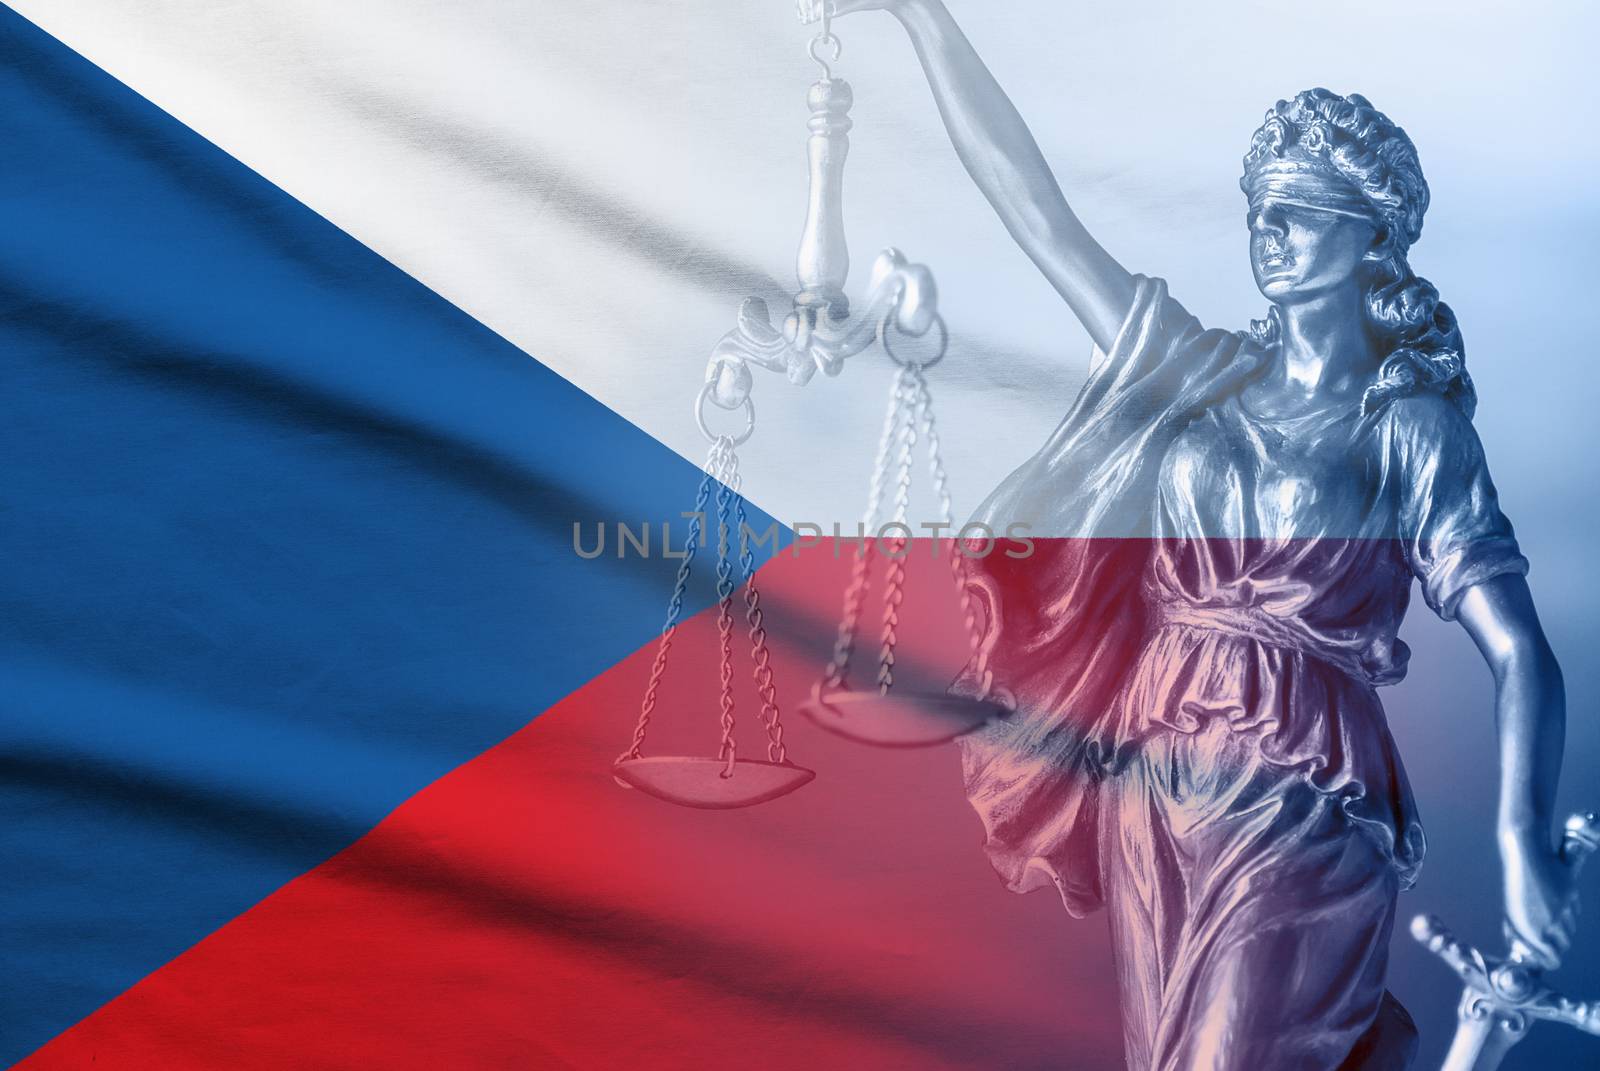 Composite of the Czech Republic national flag and statue of Justice holding the scales and sword of law